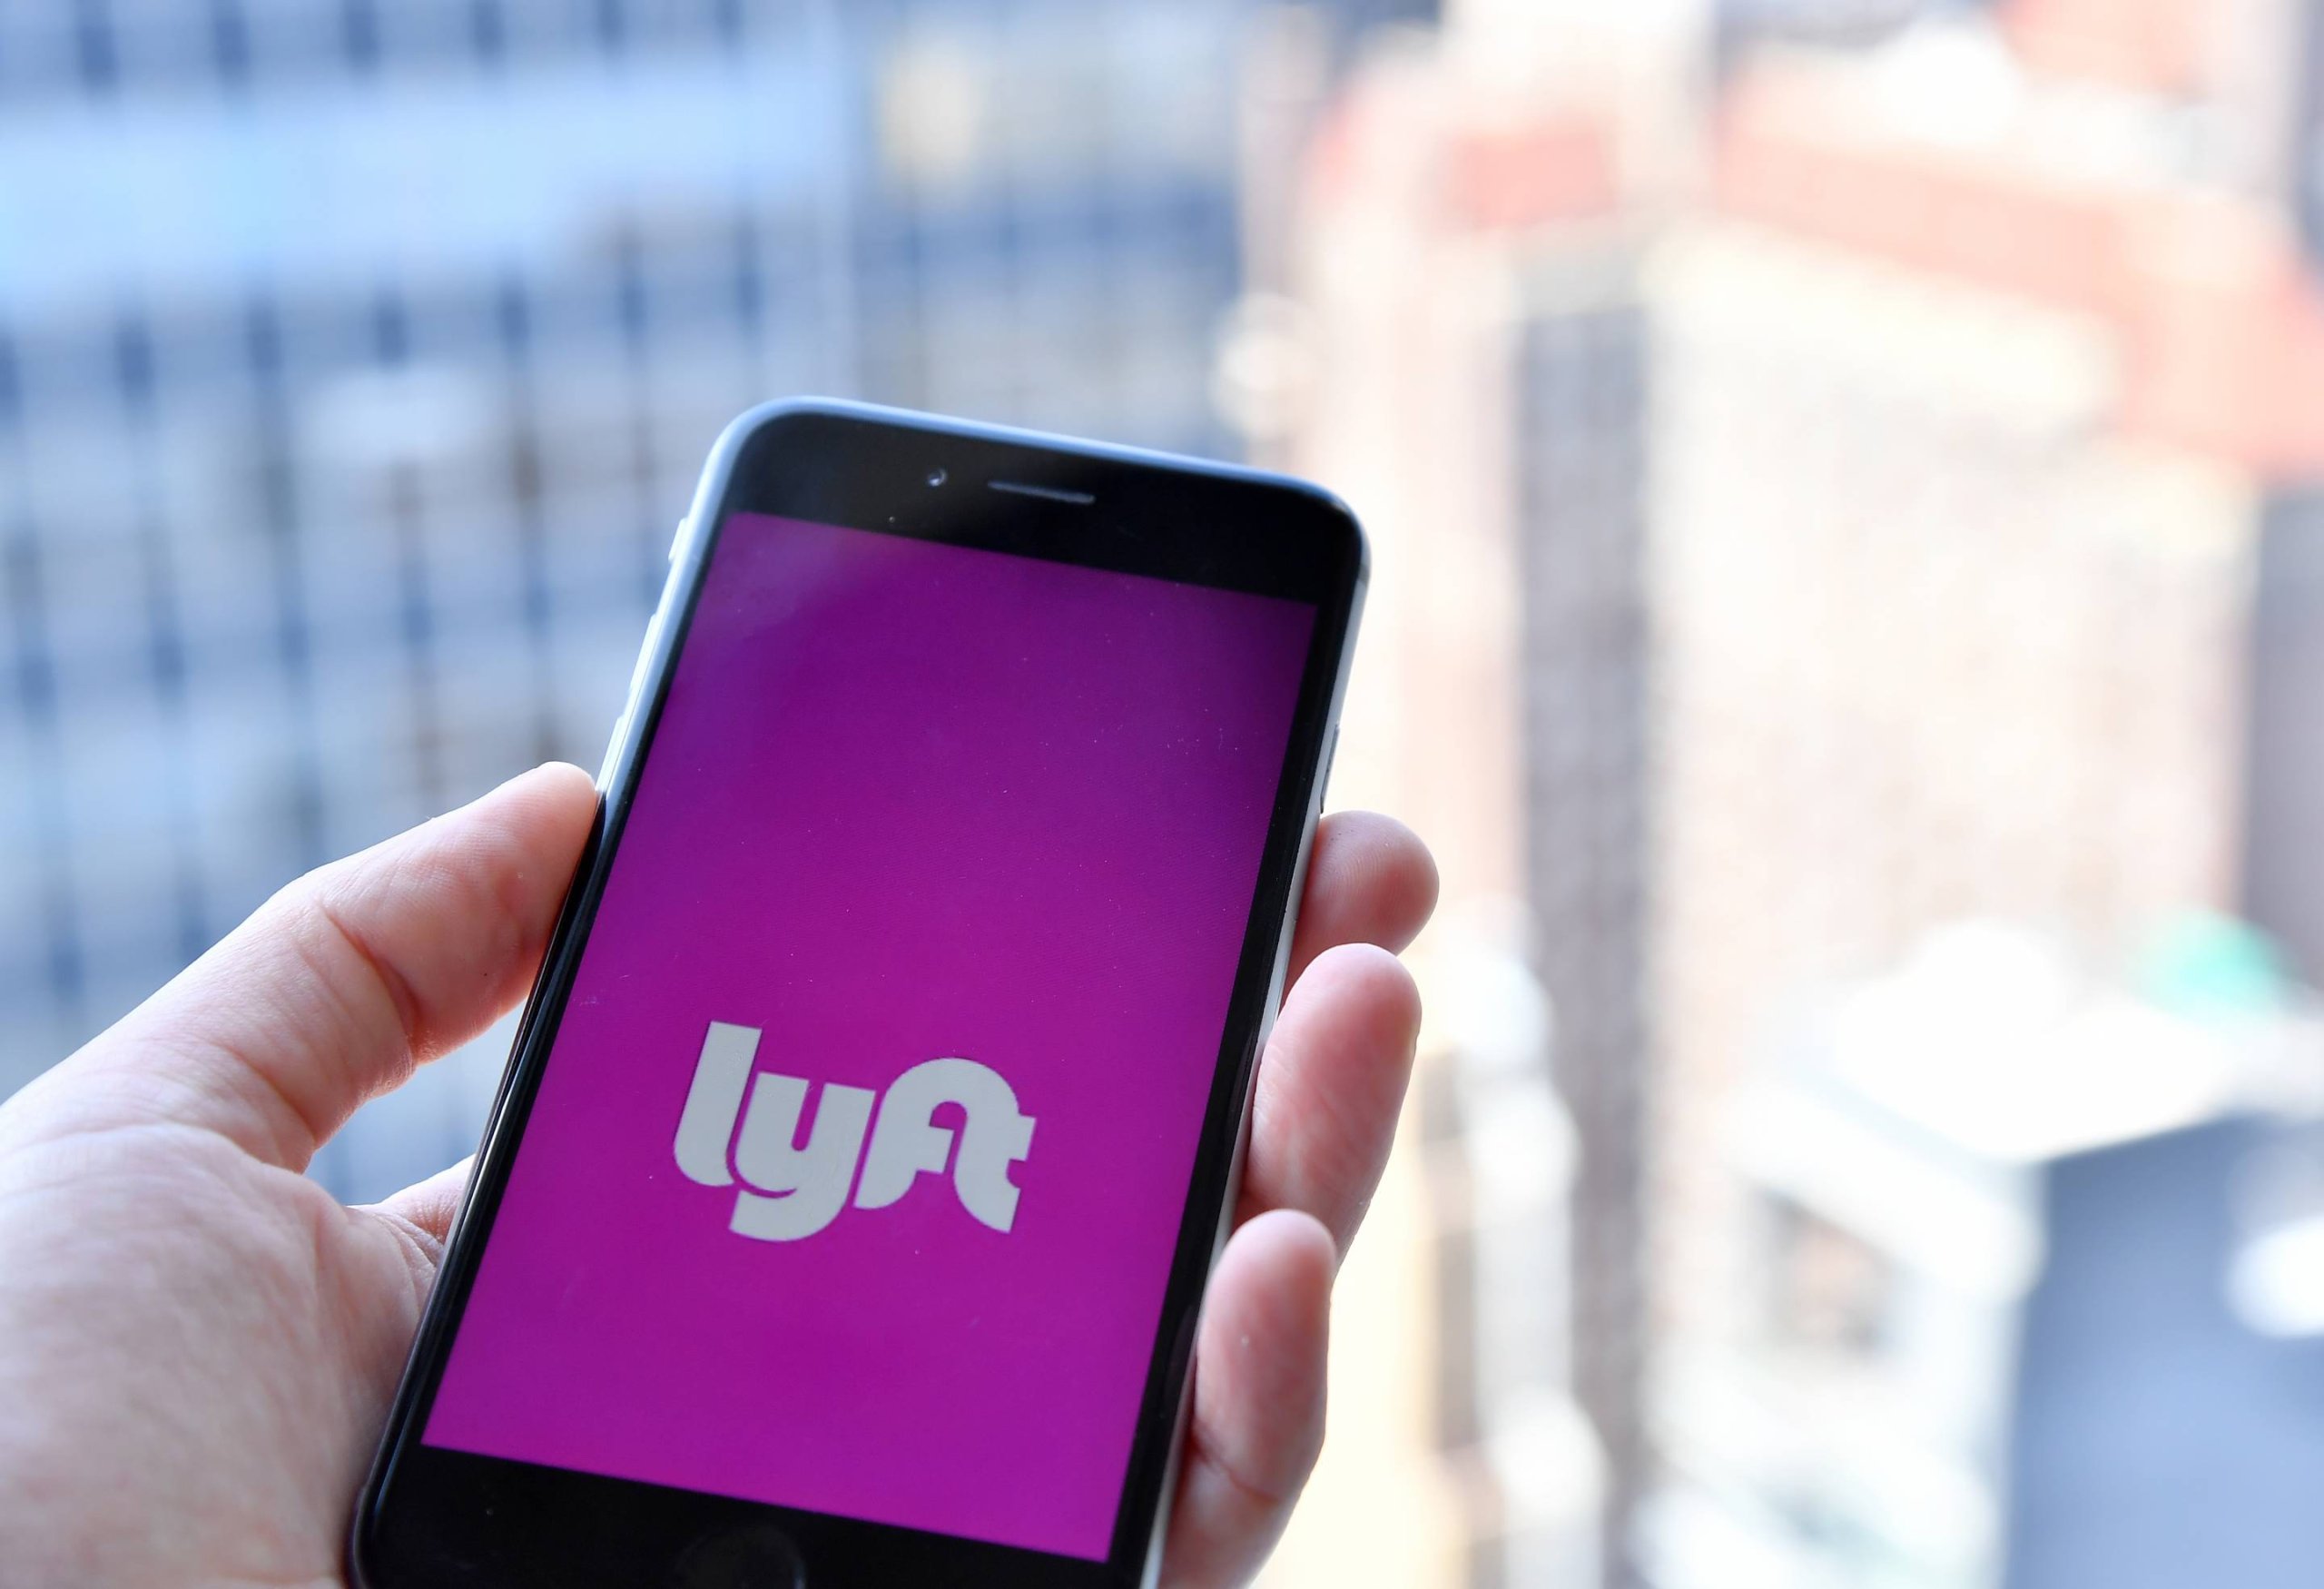 Lyft doubles its revenues in 2018 while losses expand